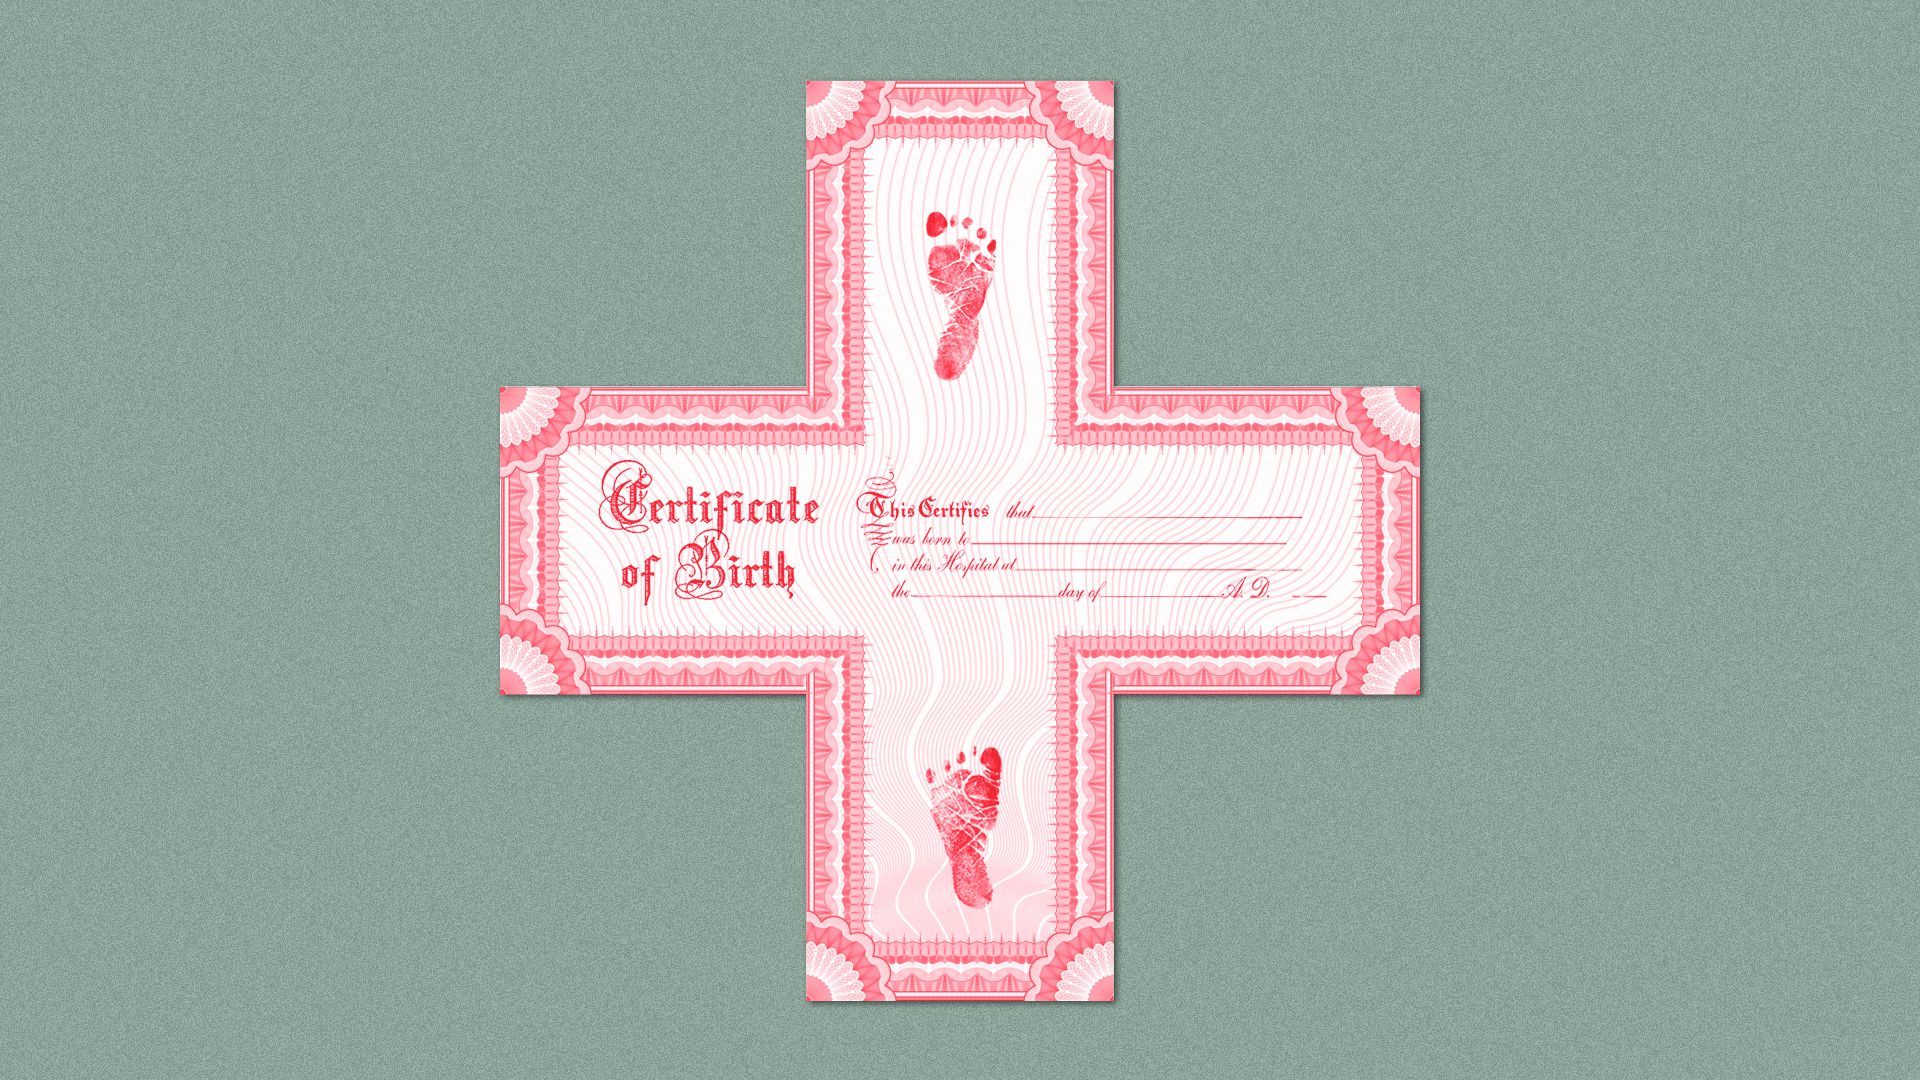 Illustration of a birth certificate in the shape of a red cross.